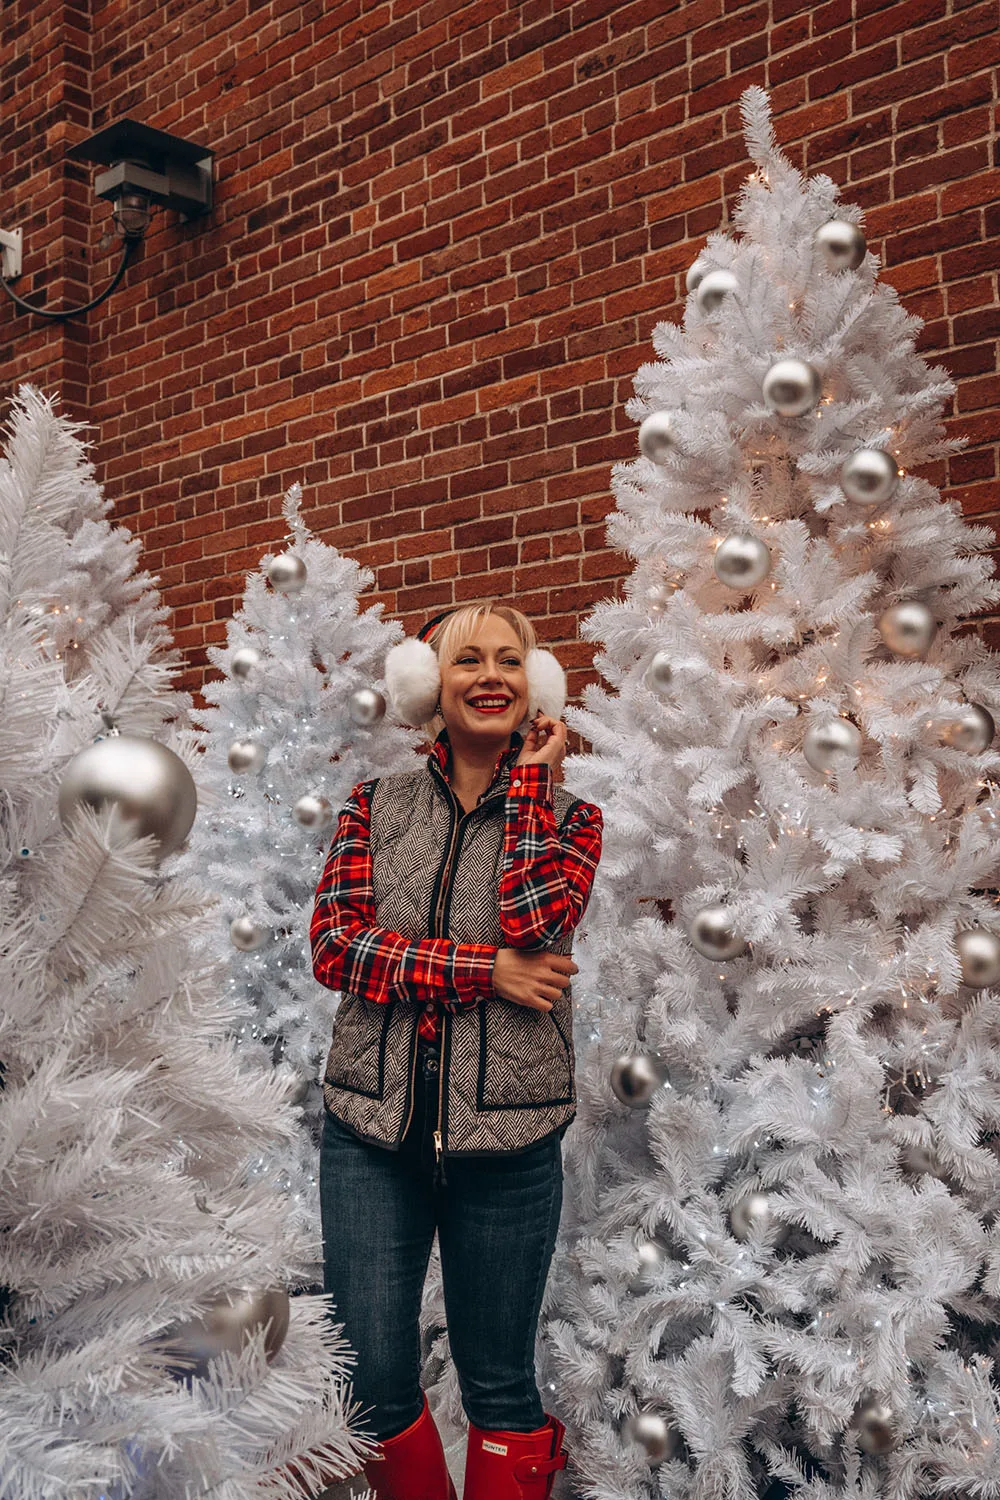 Looking for some fun things to do at Christmas in Toronto this holiday season? This guide is for you! Toronto has so many incredibly fun & festive activities to do during the Christmas season. From festive pop up bars to family friendly fun, this guide has you covered to get the most out of the Christmas season in Toronto! Pictured here: Distillery Winter Village